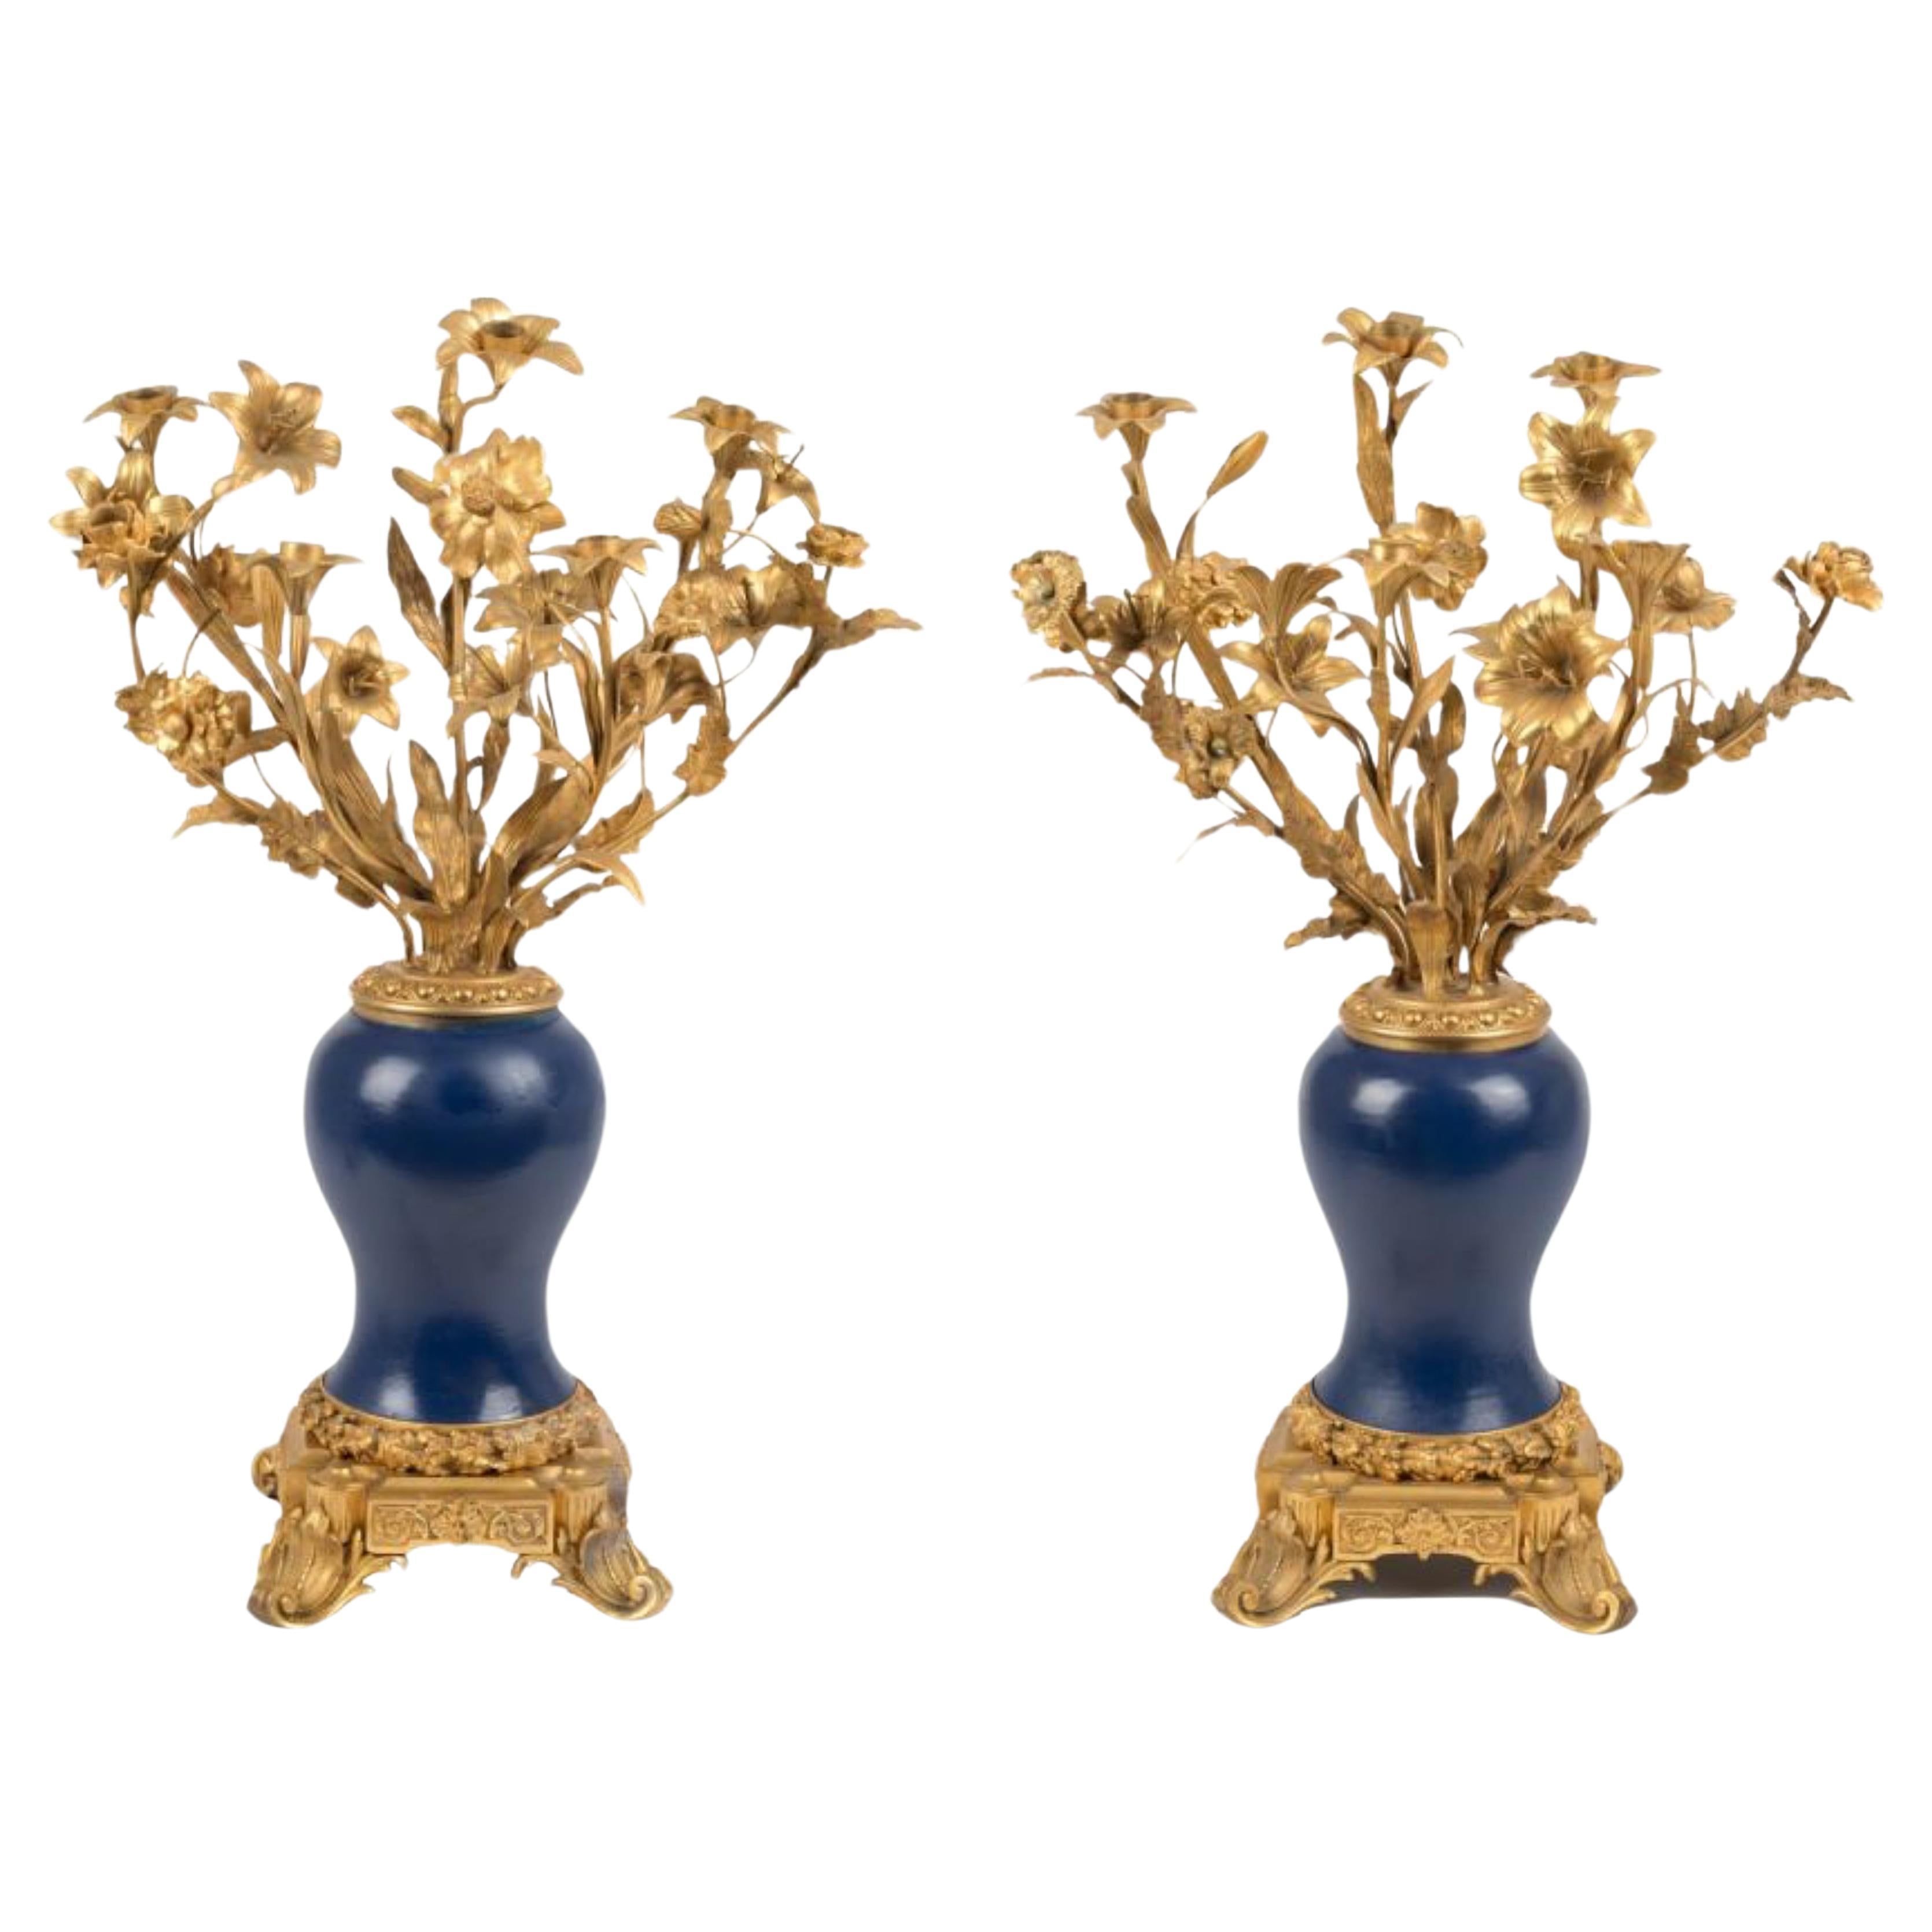 Magnificent Pair of 19th Century French Candelabra